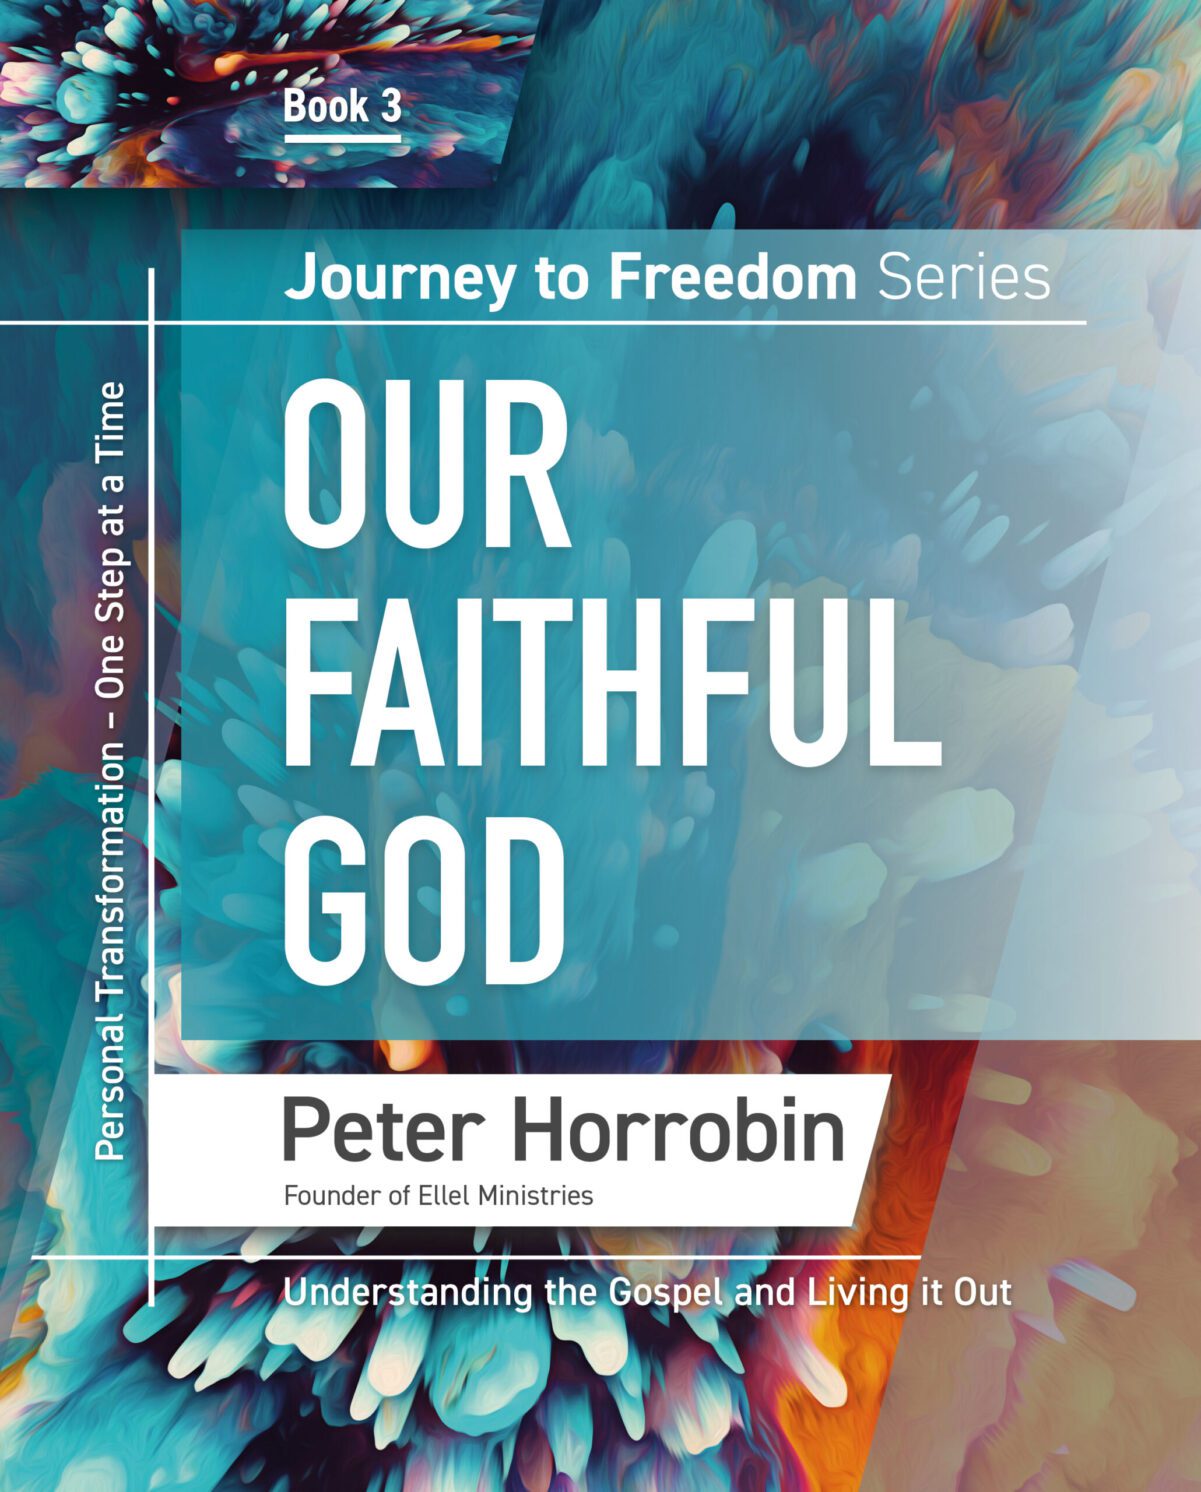 Journey to Freedom Book 3 – Our Faithful God